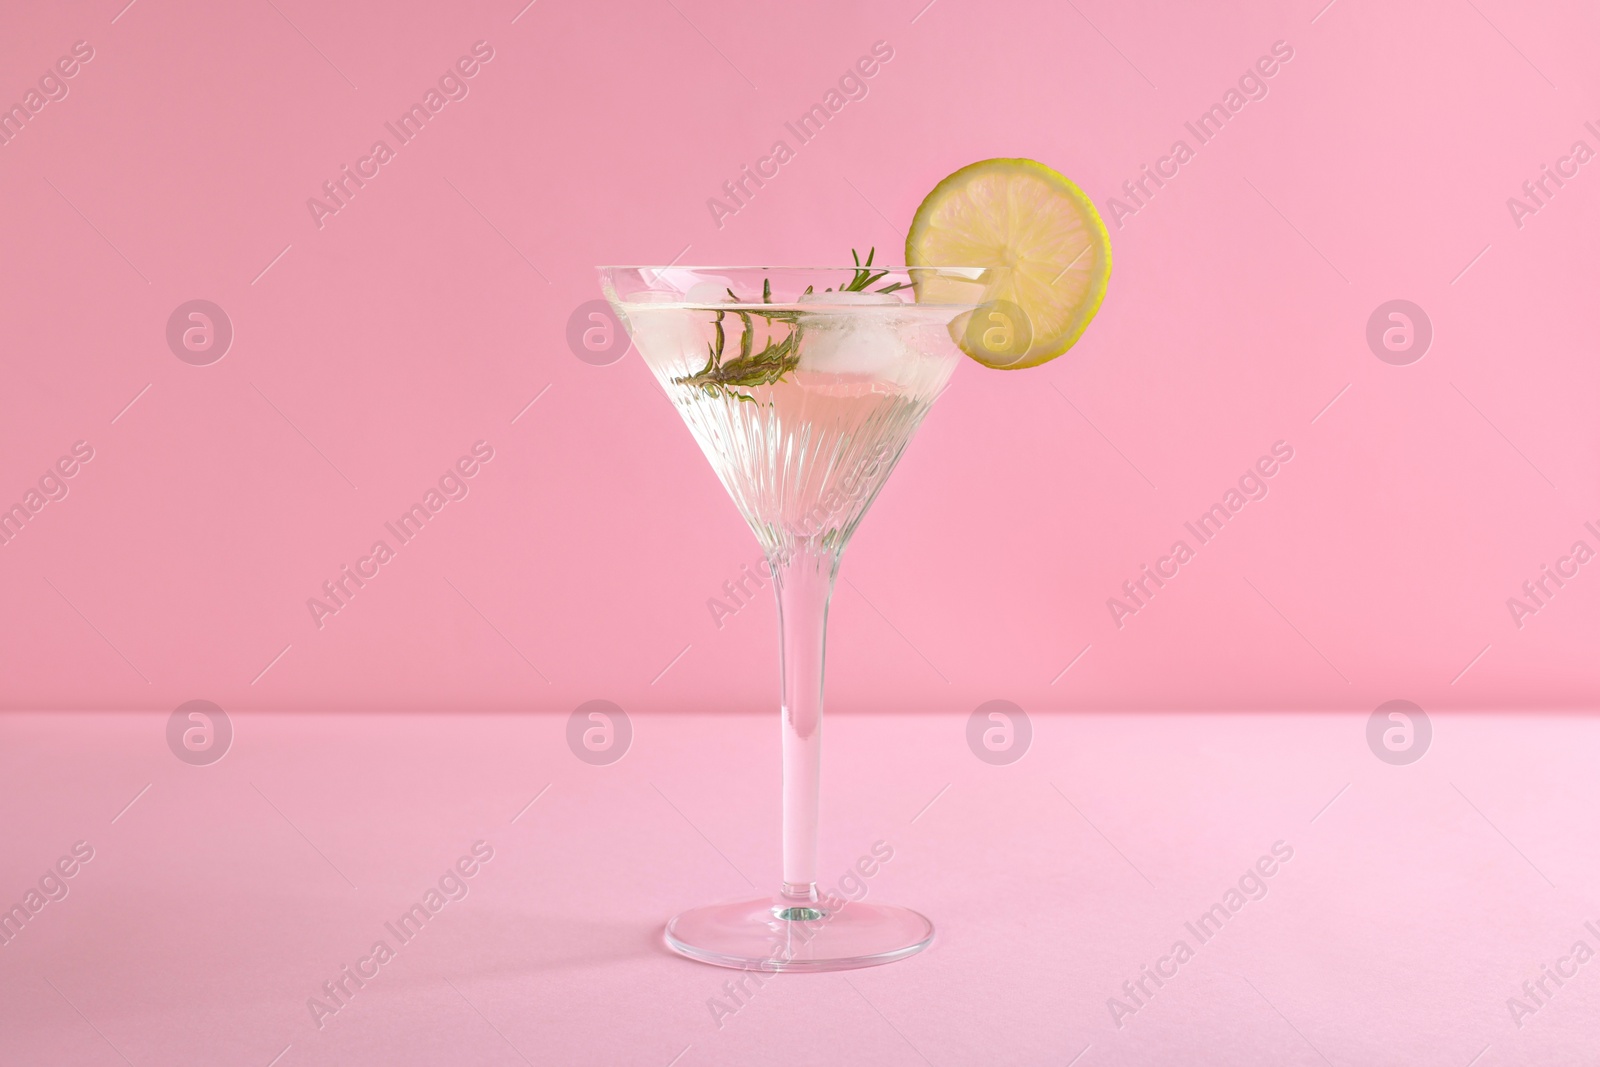 Photo of Martini glass of cocktail with lemon slice and rosemary on pink background